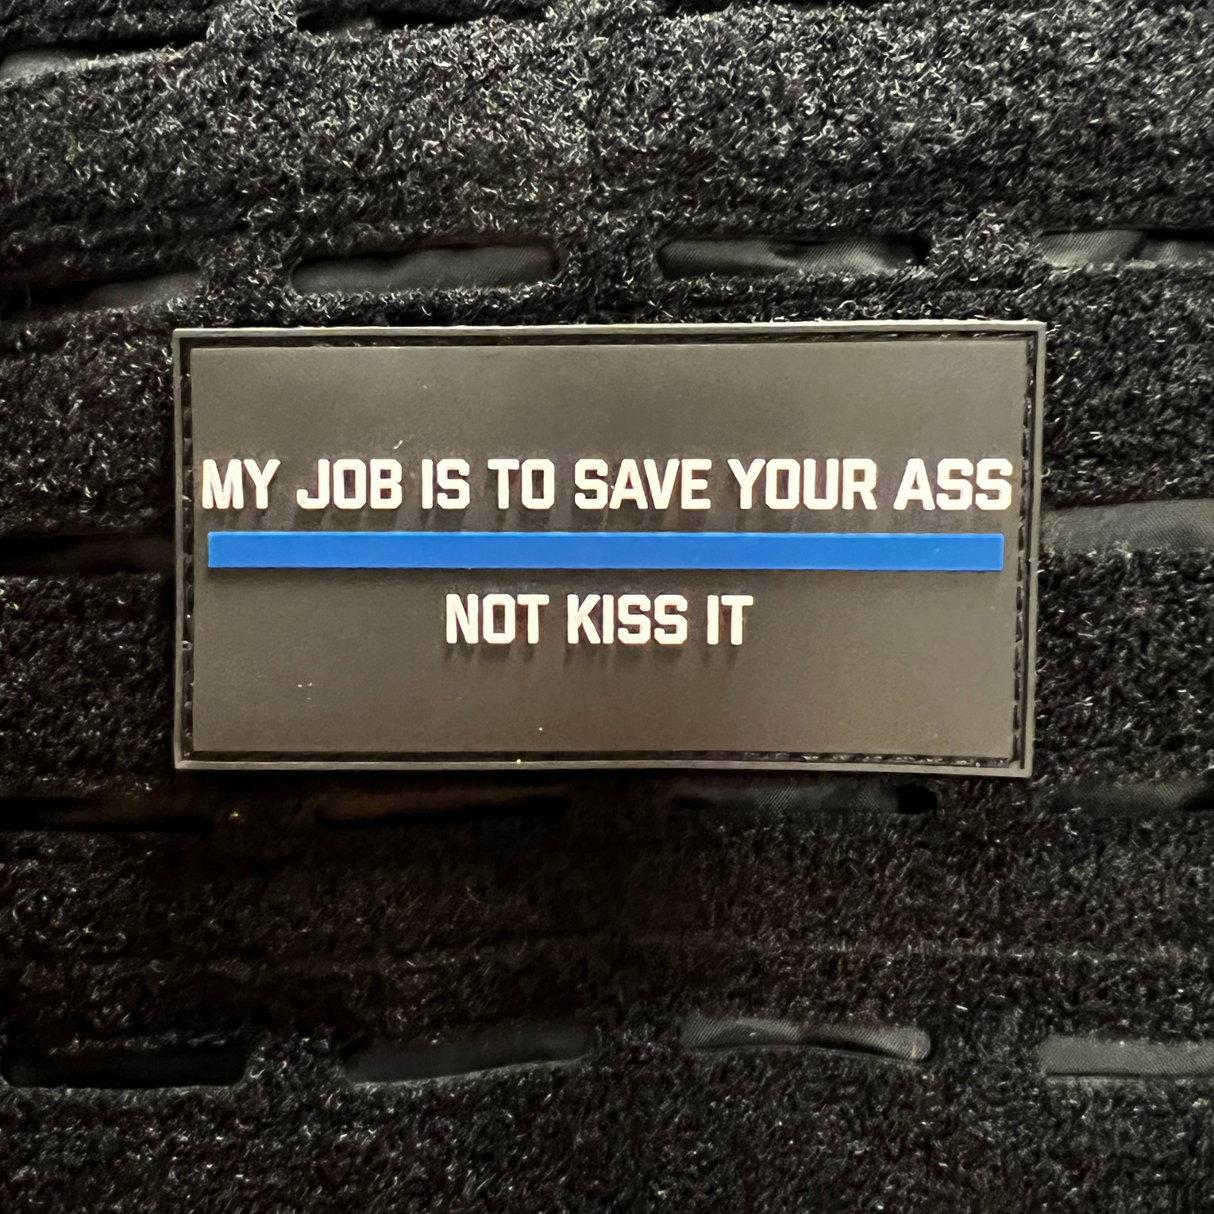 MY JOB IS TO SAVE YOUR ASS Rubber patch